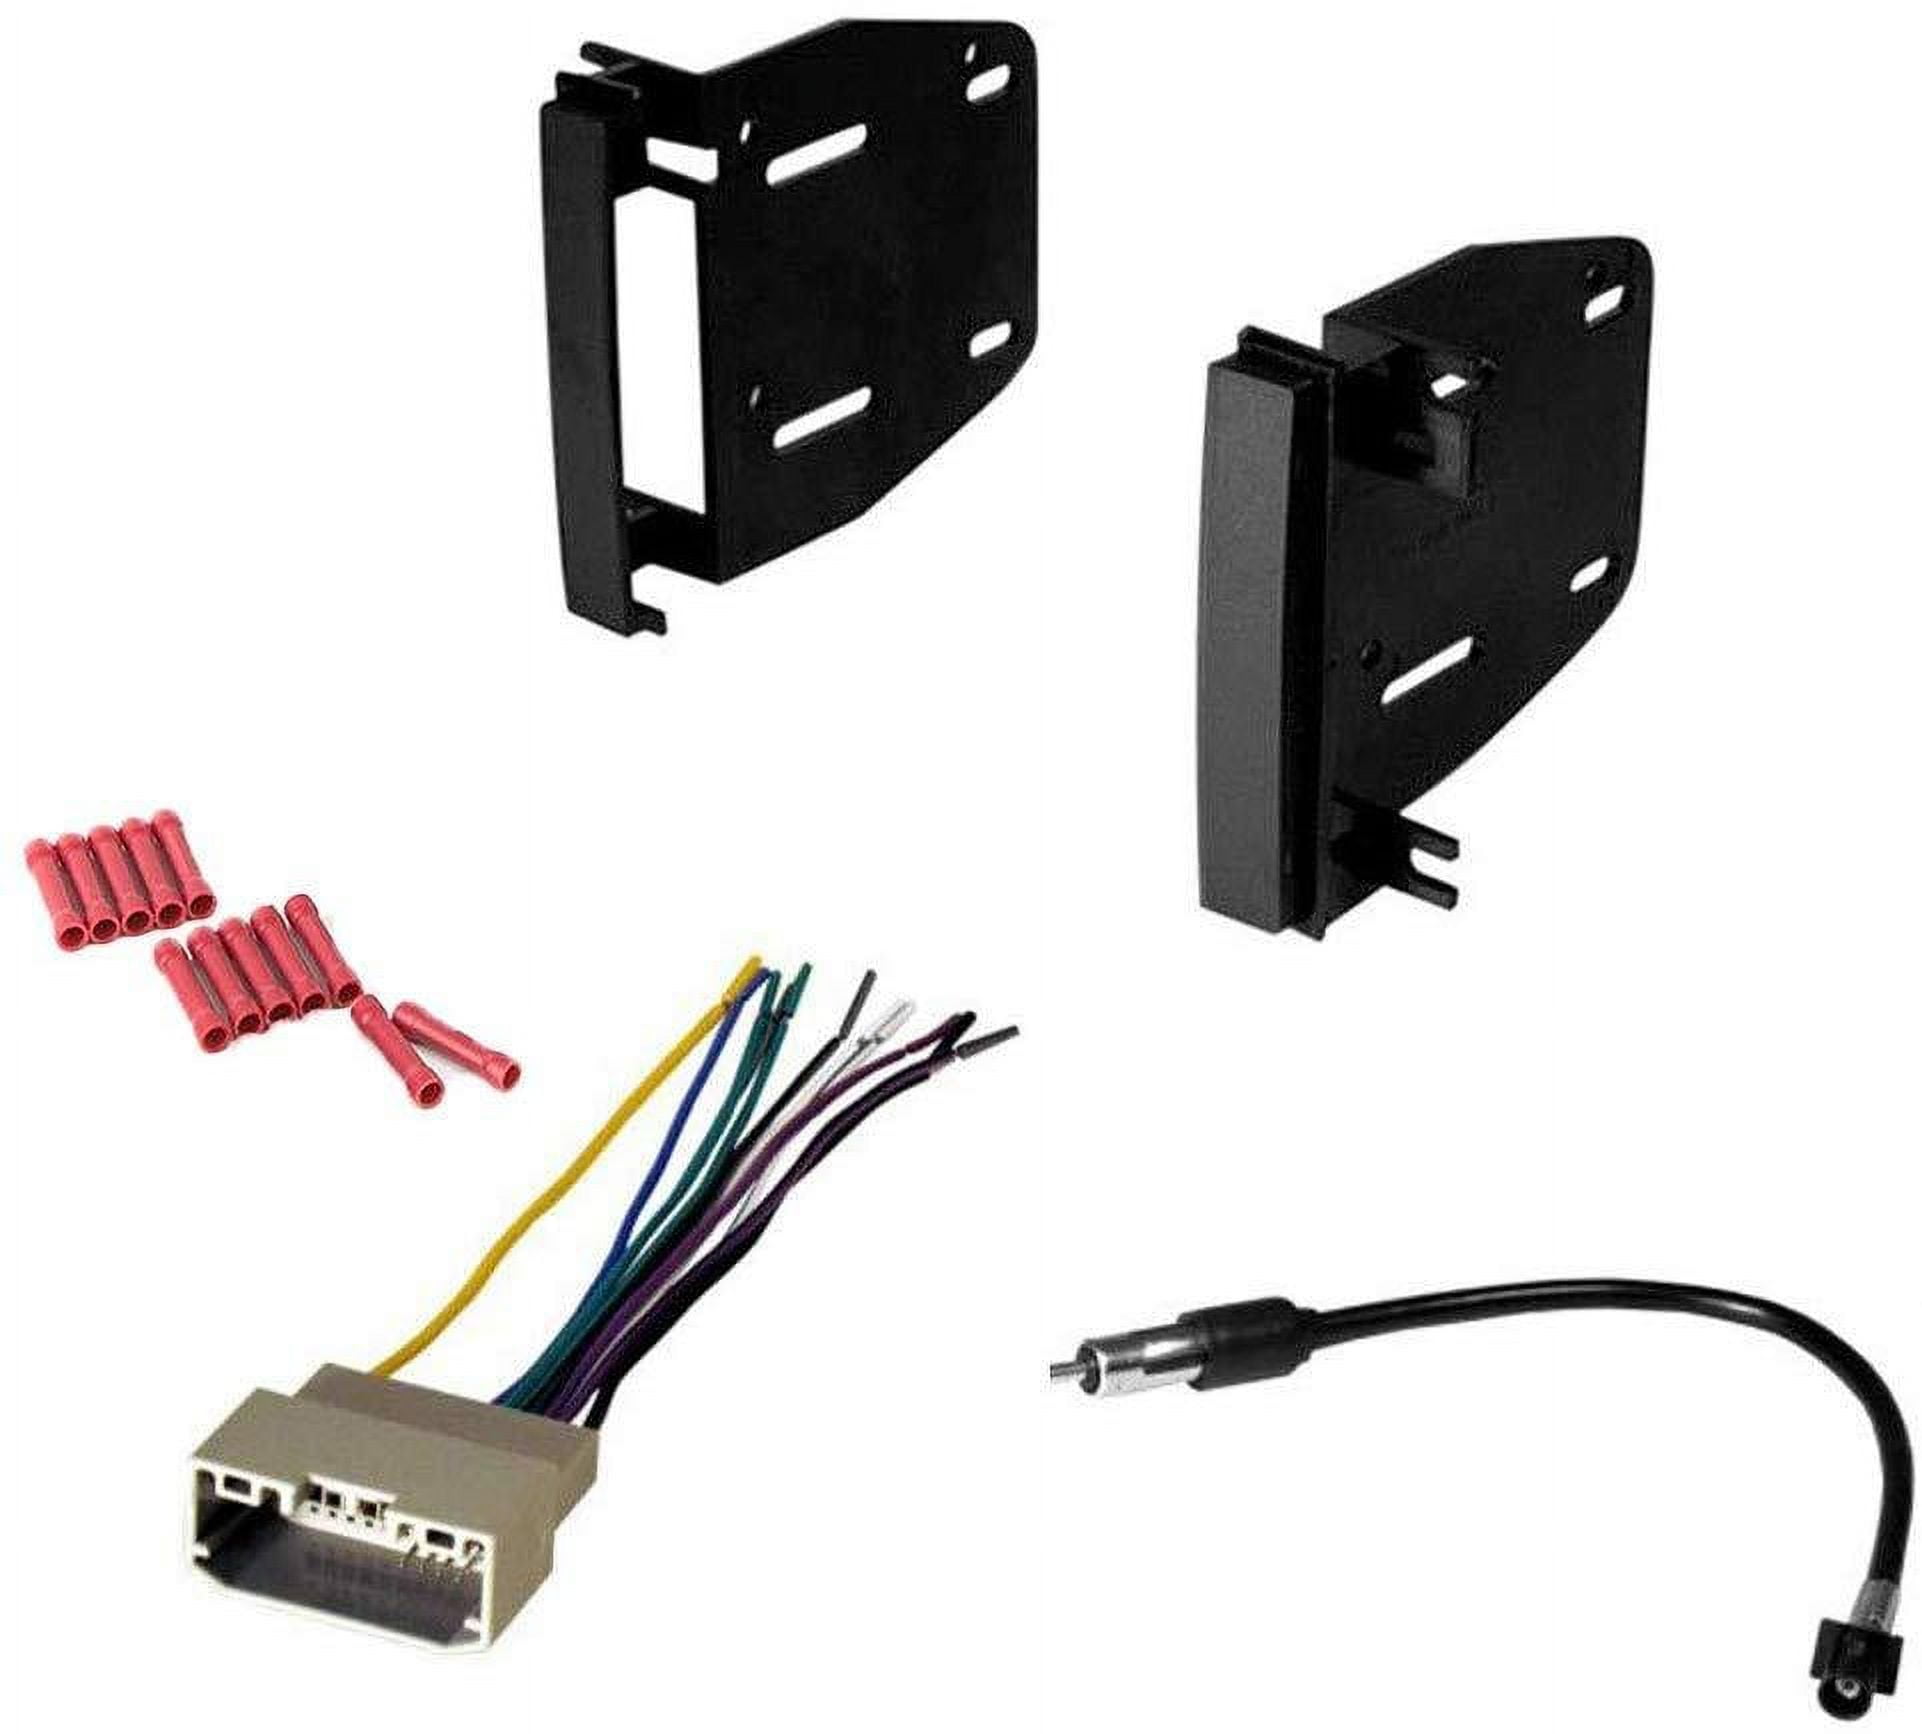 GSKIT868 Car Stereo Installation Kit for Jeep 2007-2014 Wrangler - in Dash  Mounting Kit, Wire Harness, Antenna Adapter for Double Din Radio Receivers  